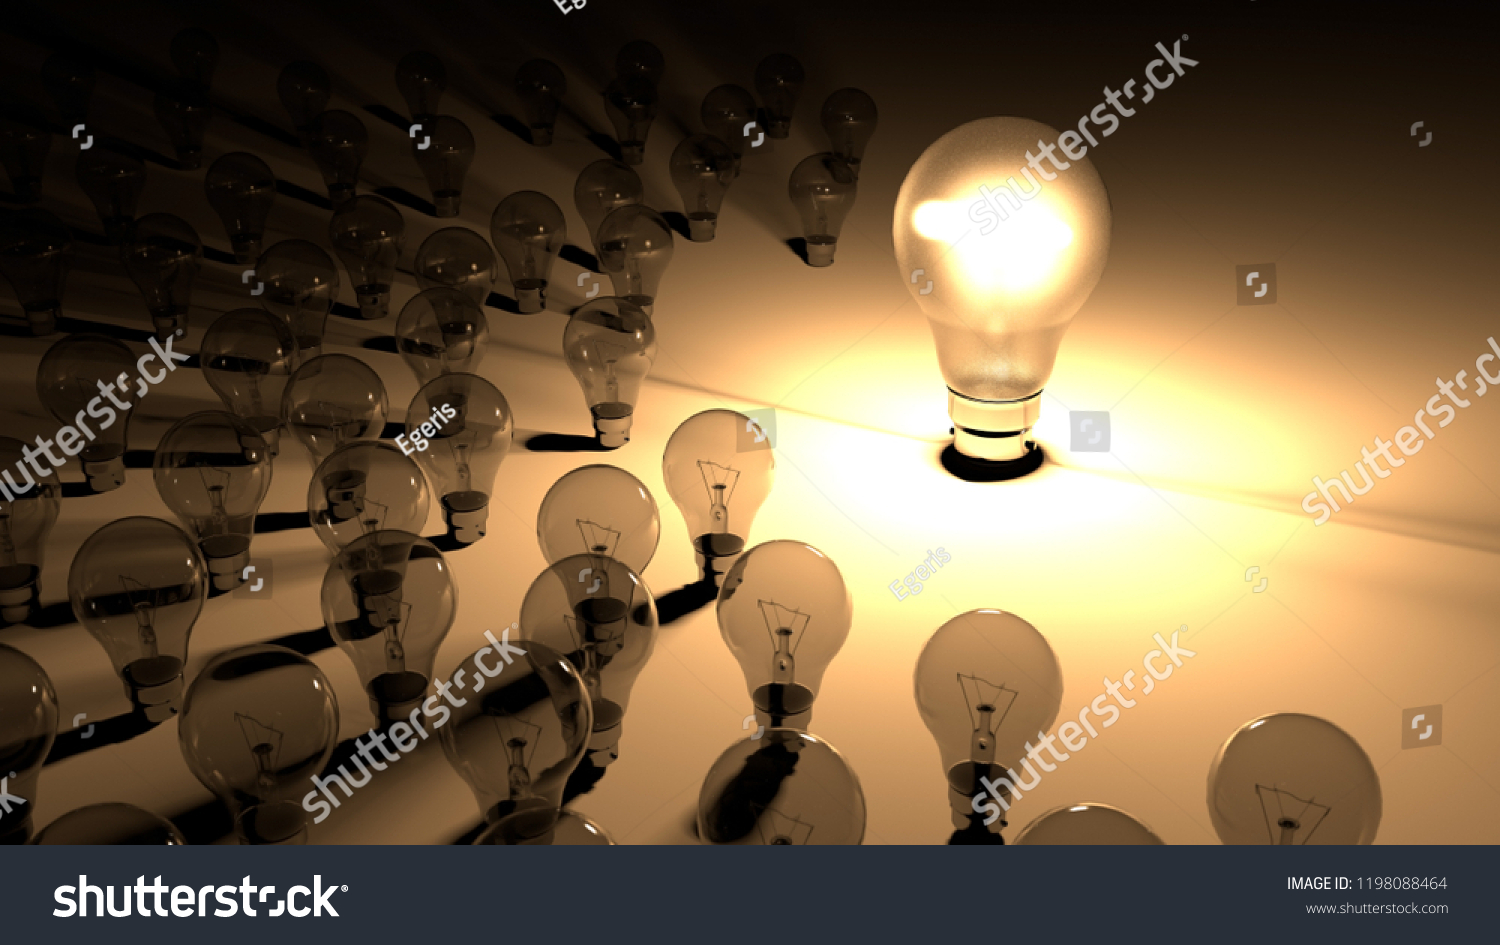 Lightbulbs placed around the glowing light bulb. The big lighbulb is glowing surounded by small lightbulbs, which are dead and shutdown. Representation of big energy consuption of bulbs. #1198088464